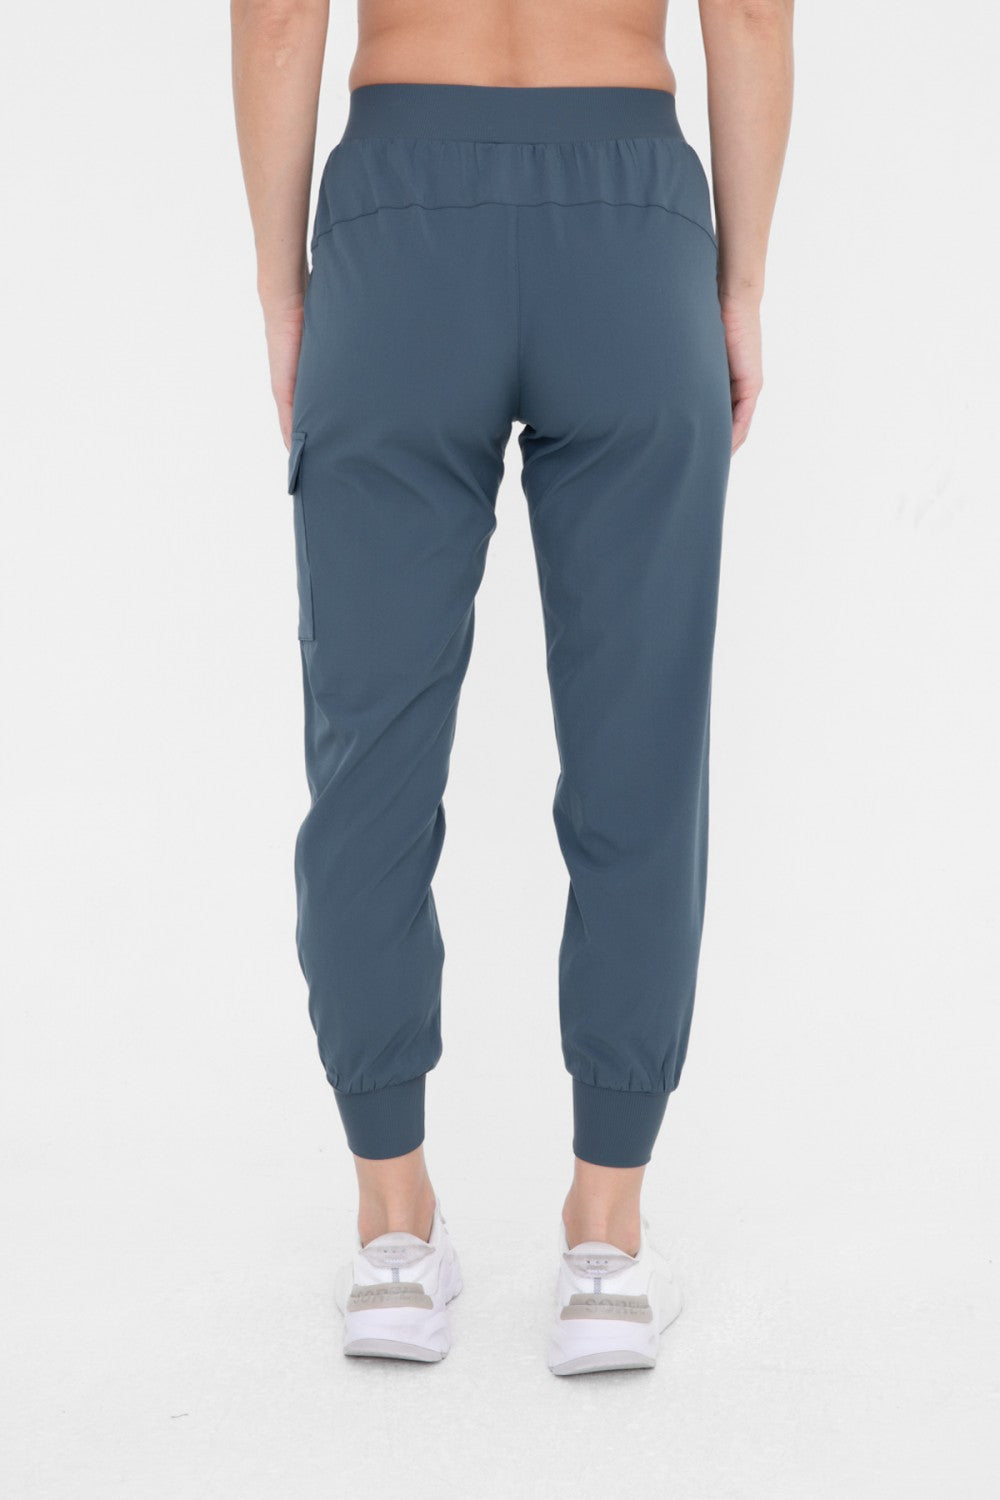 High-Waisted Capri Active Joggers with Pockets - AP-B0115